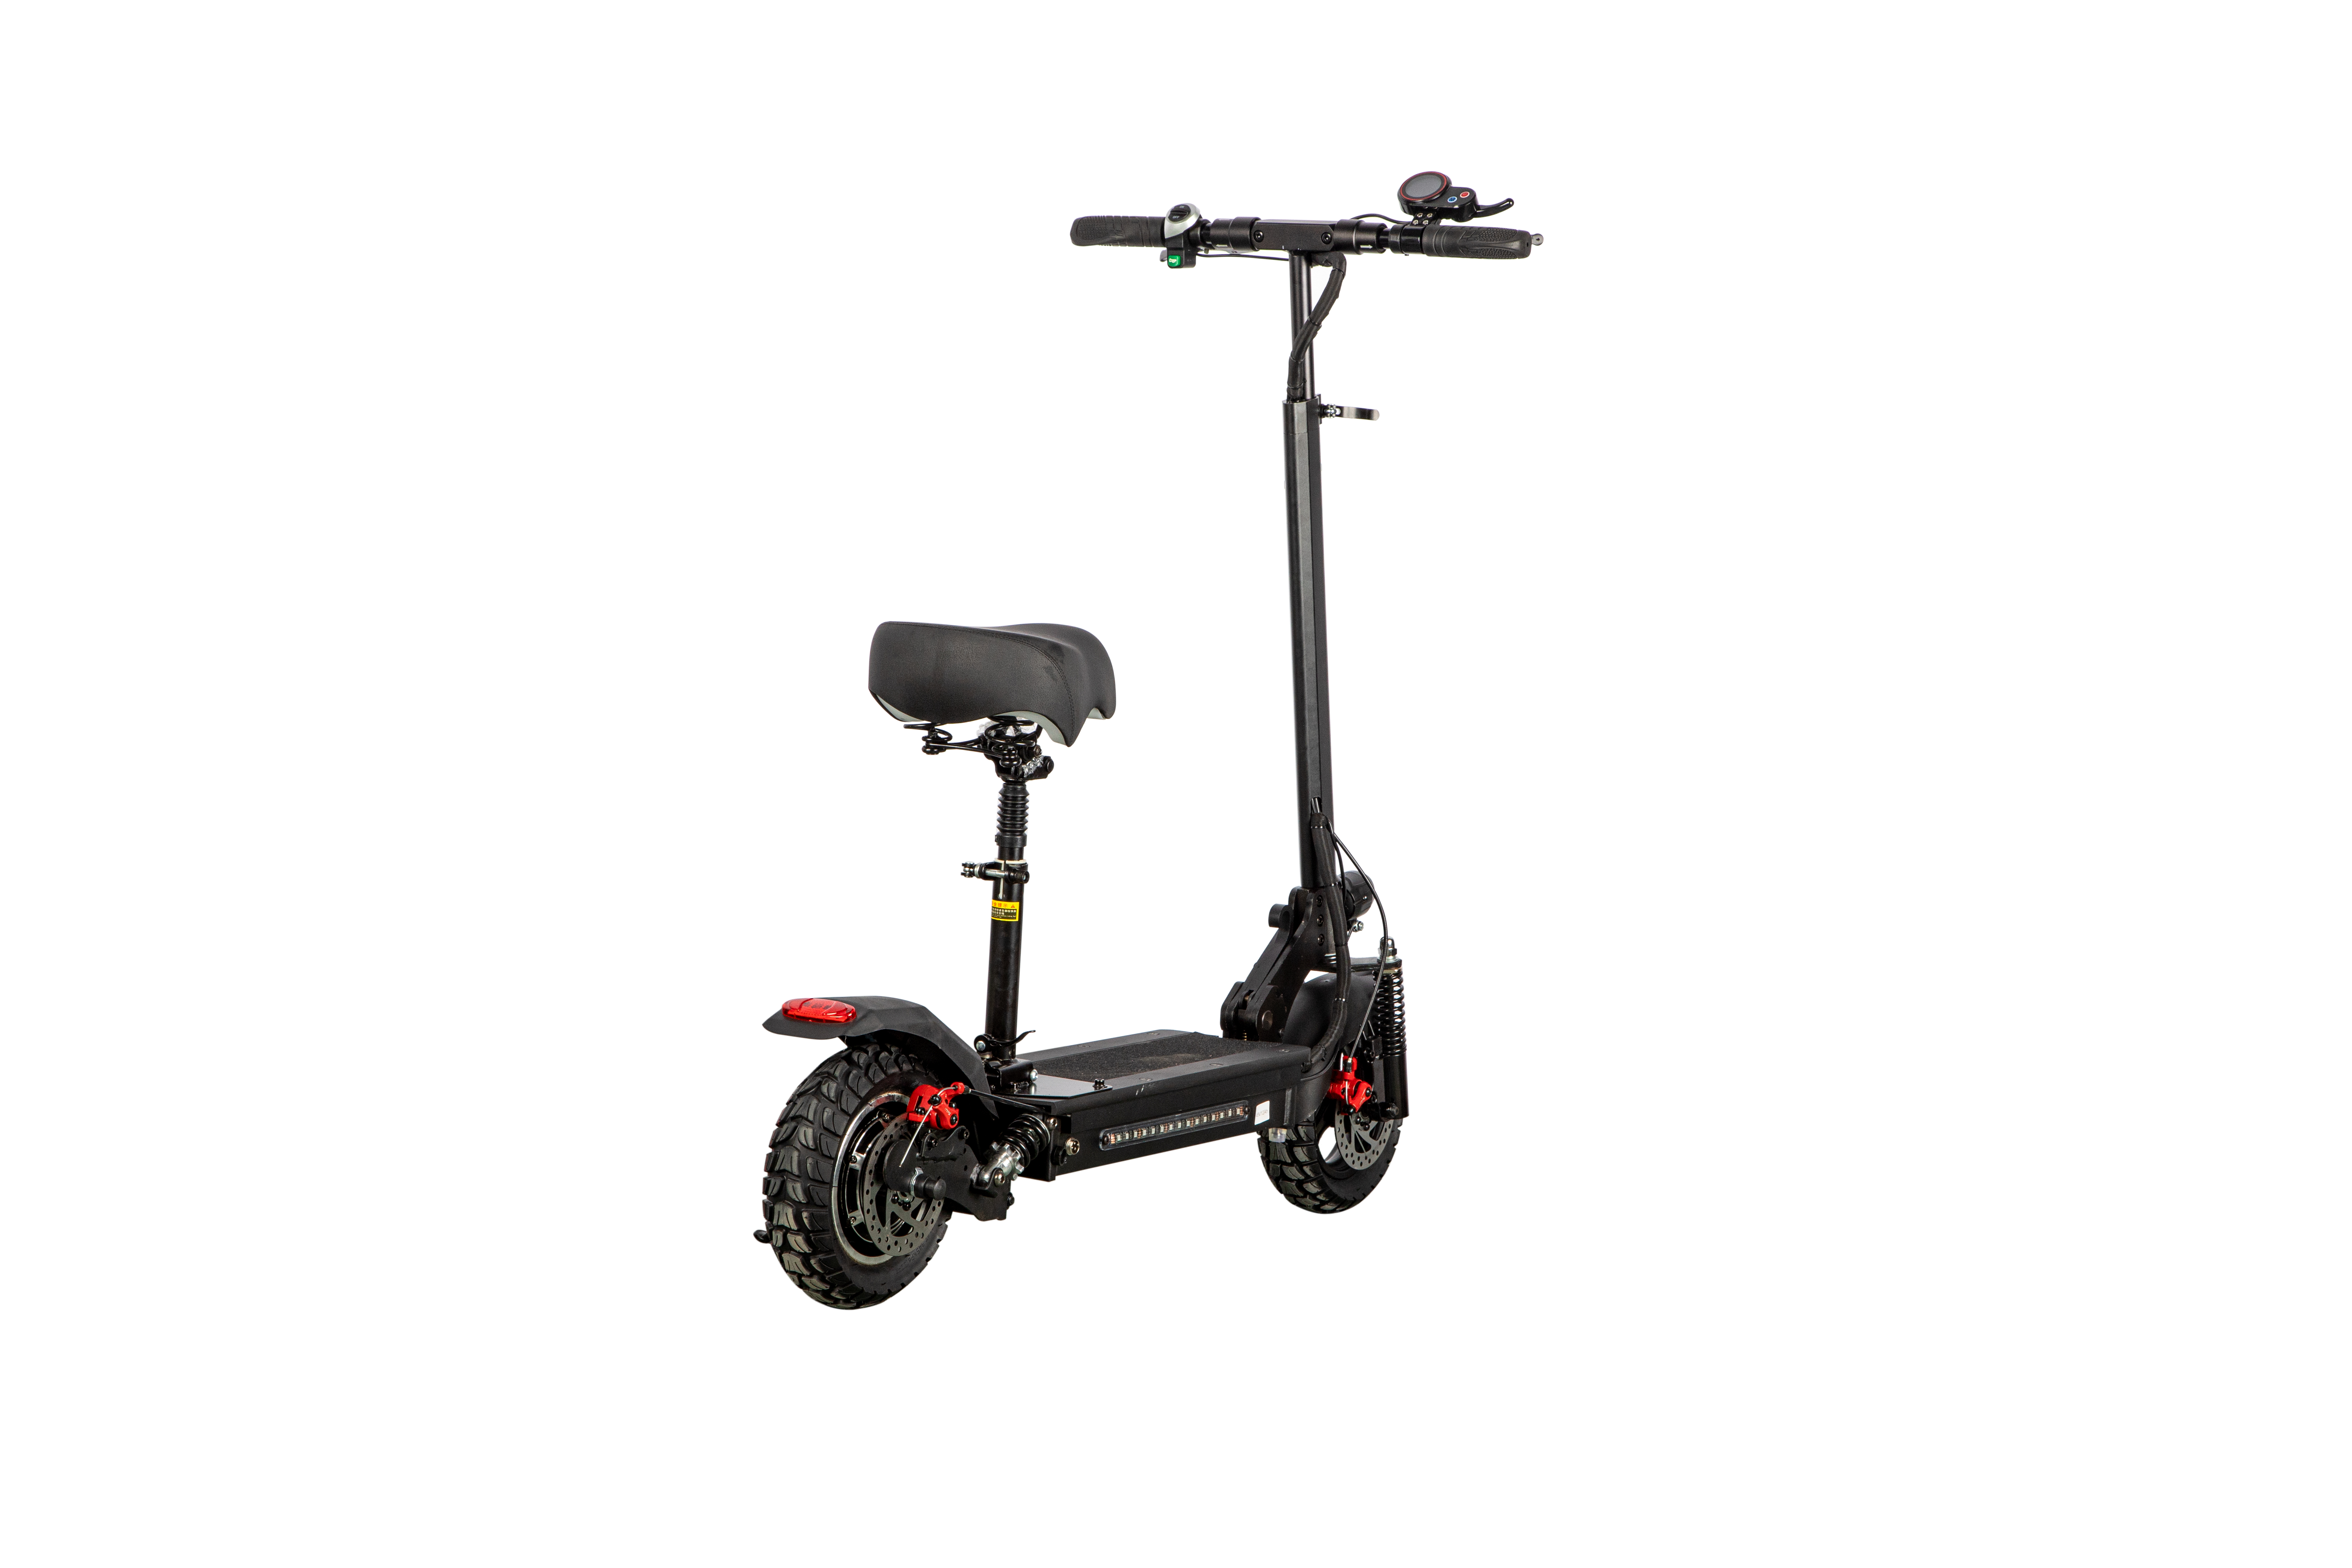  48V 10AH LITHIUM BATTERY 10 INCHES WHEEL ELECTRIC SCOOTER WITH SEAT VERSION (X TRACK-GT-1)